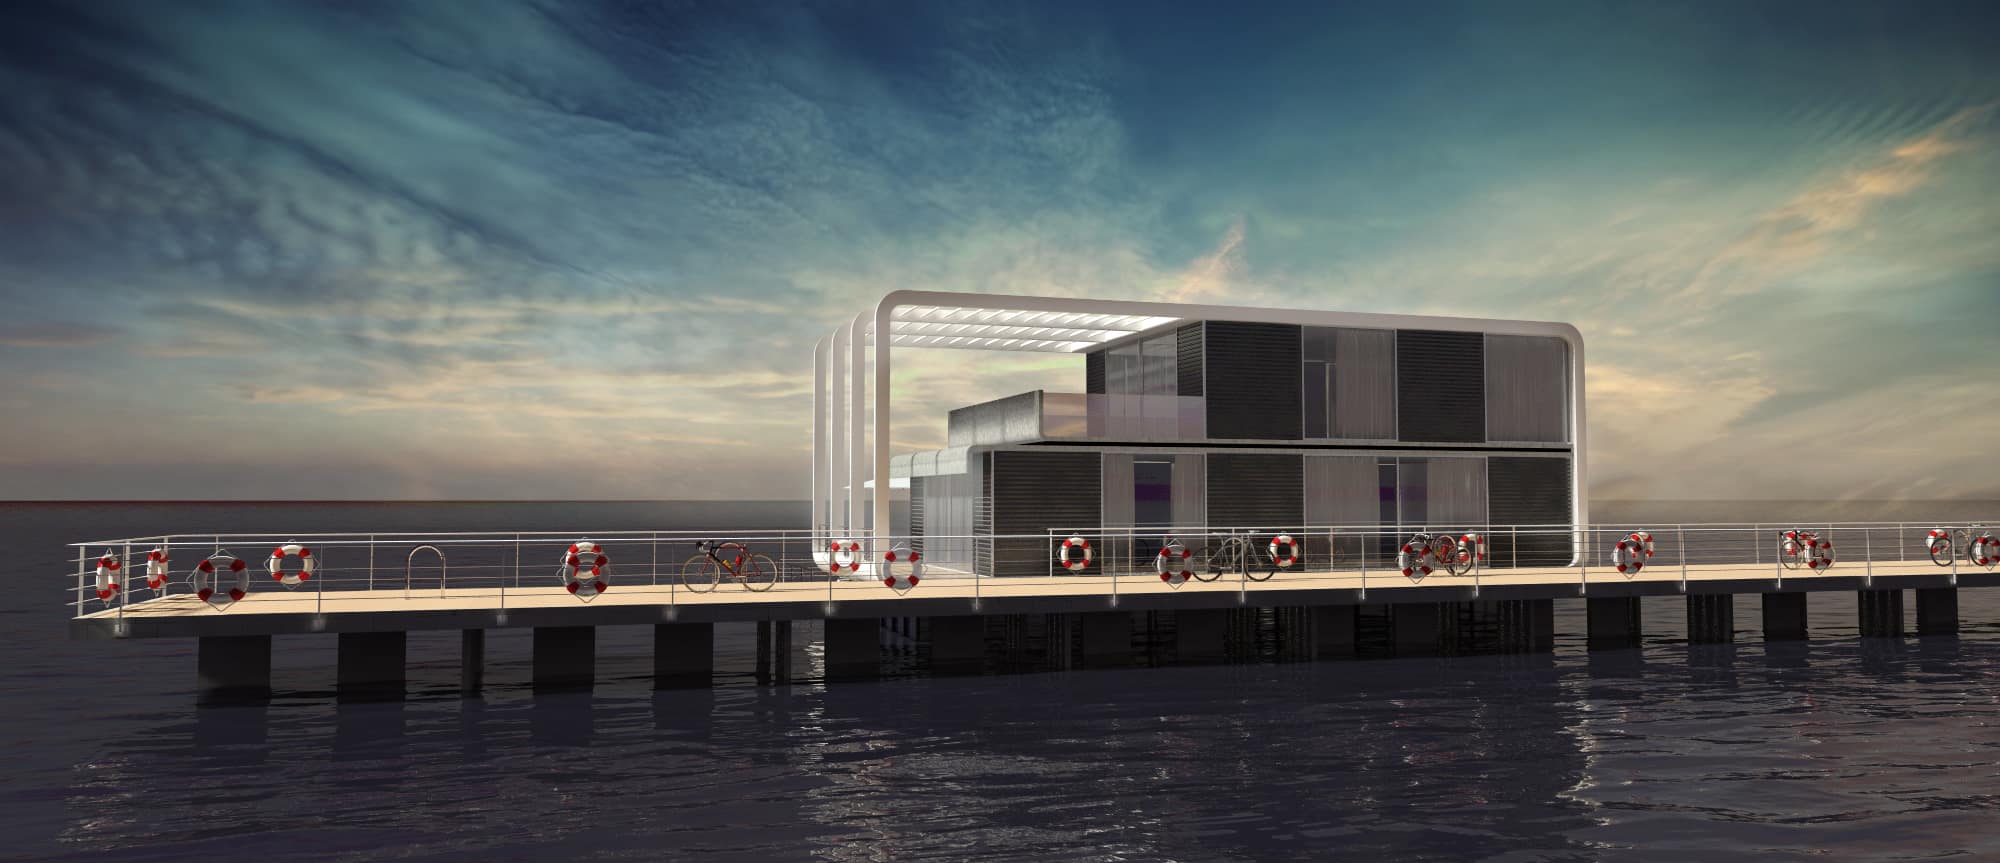 South_Developers_Floating_House_NY_4